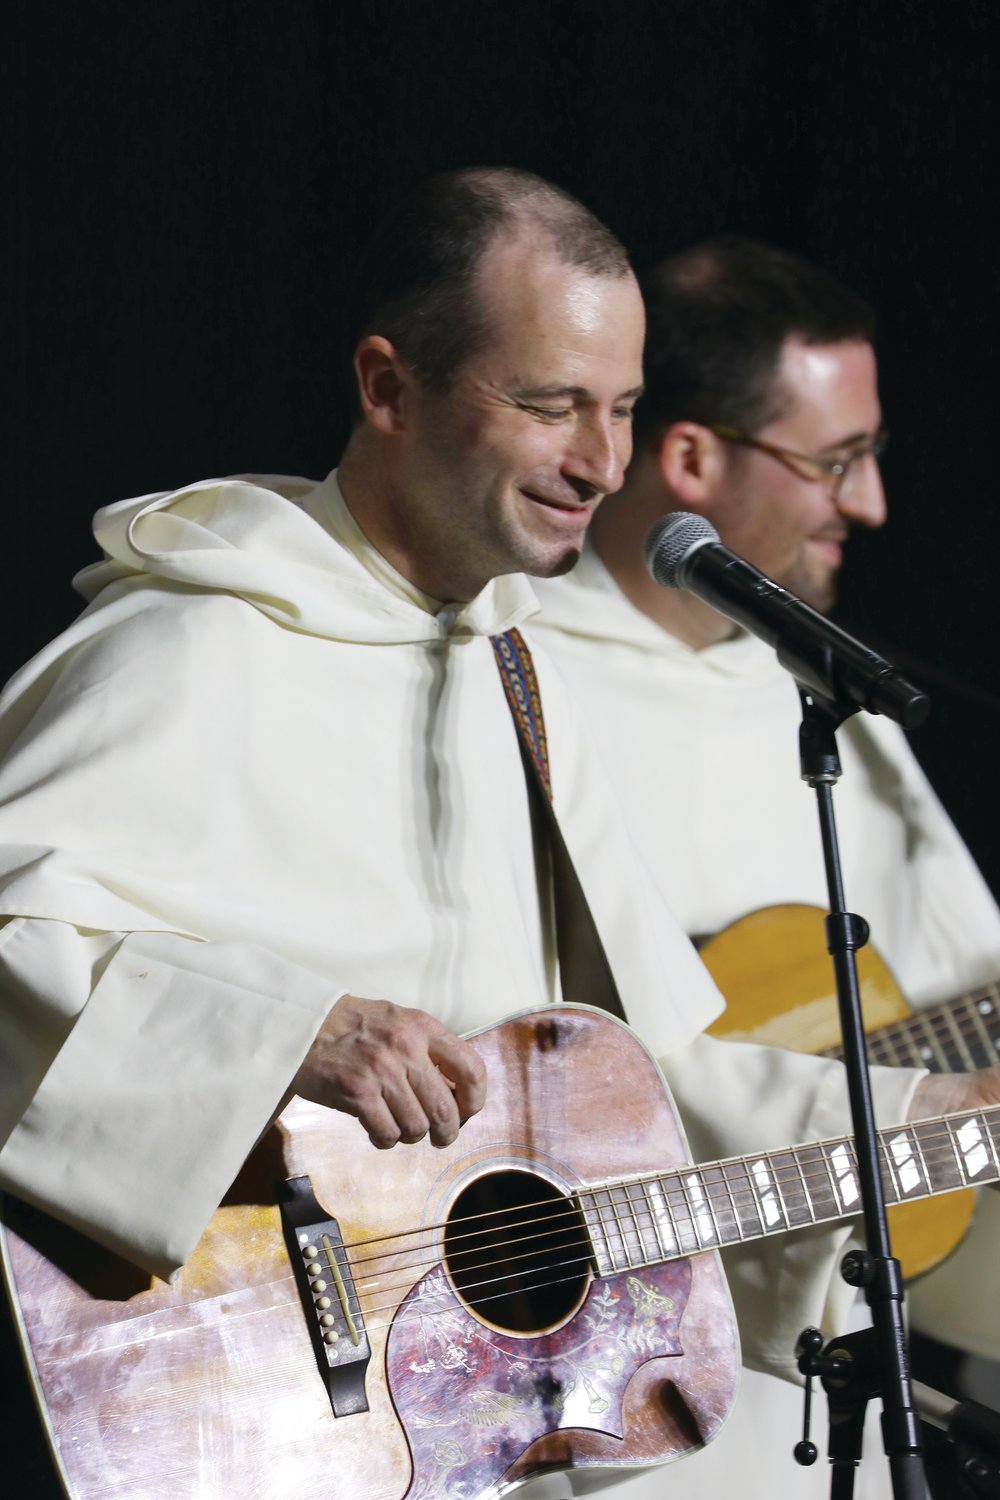 An Evening with The Hillbilly Thomists was held on Thursday, April 21, at Providence College as part of the continued celebration of the 150th anniversary of the Diocese of Providence.